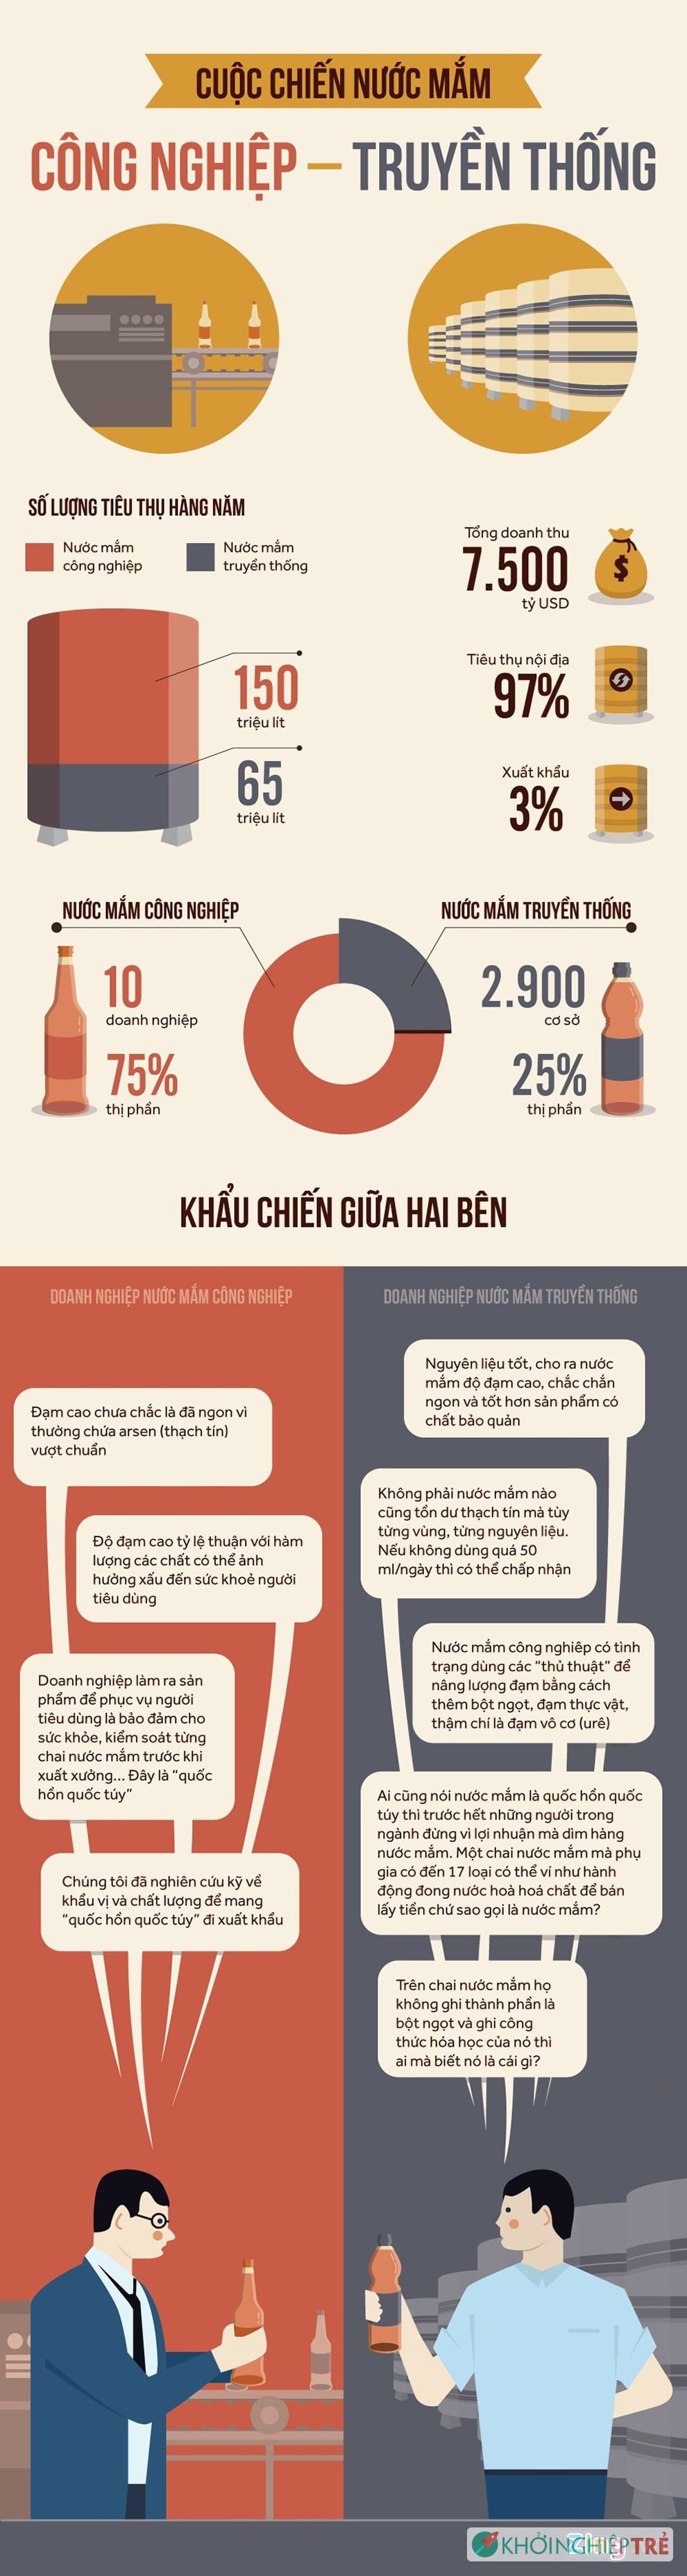 infographic-cuoc-chien-nuoc-mam-truyen-thong-va-cong-nghiep